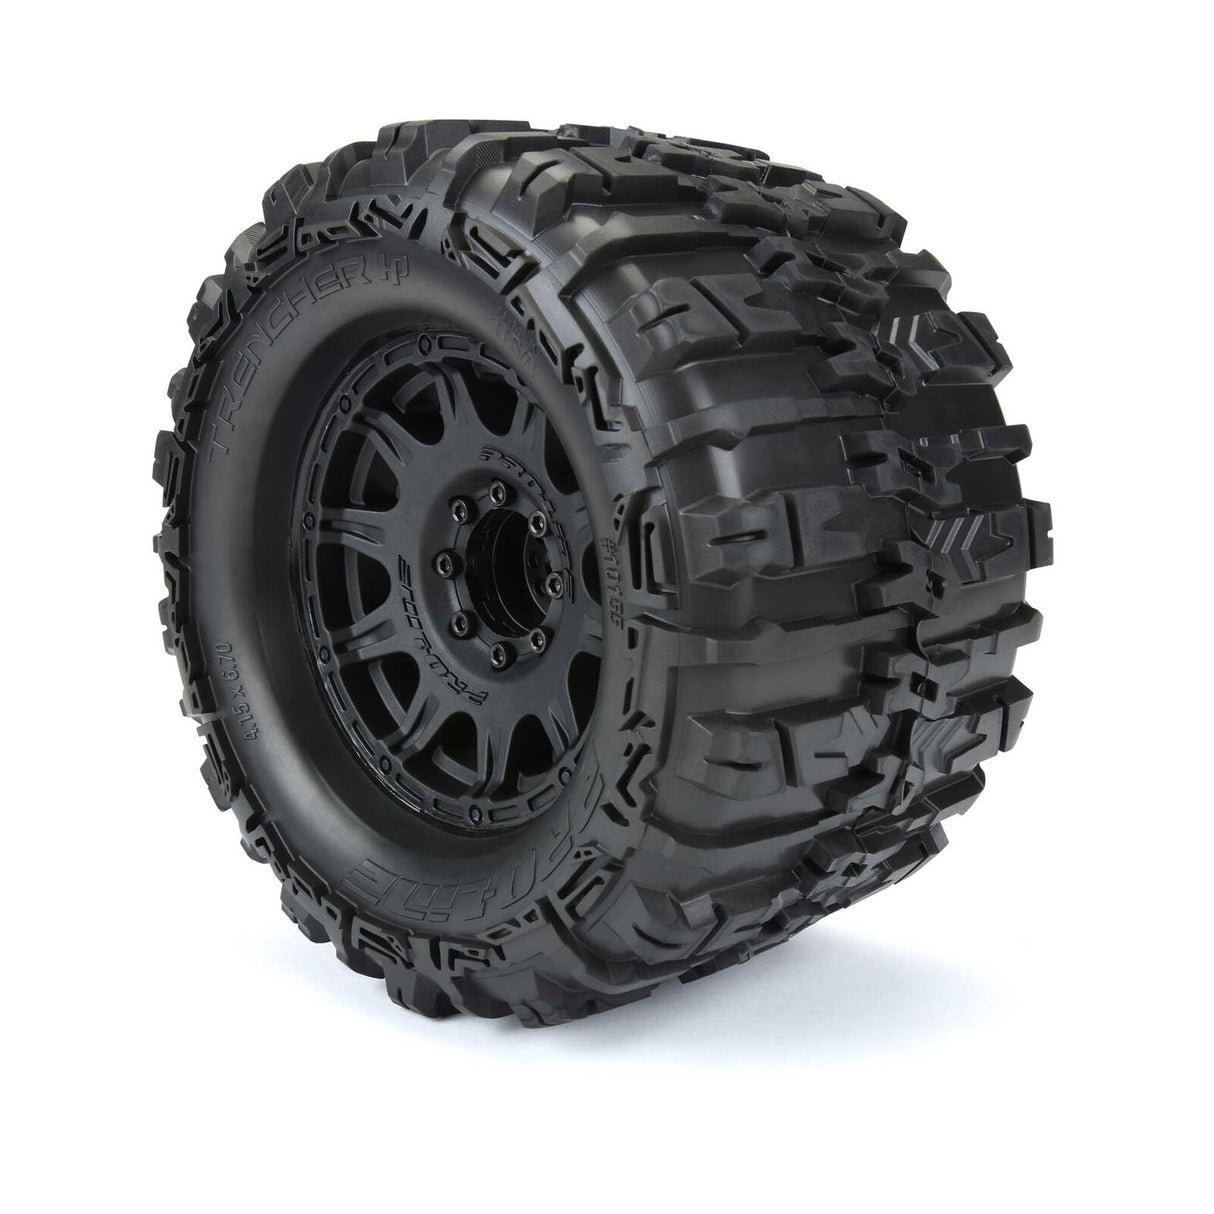 Pro-Line 10155-10 Trencher HP Belted 3.8" Pre-Mounted Truck Tires (2) (Black)